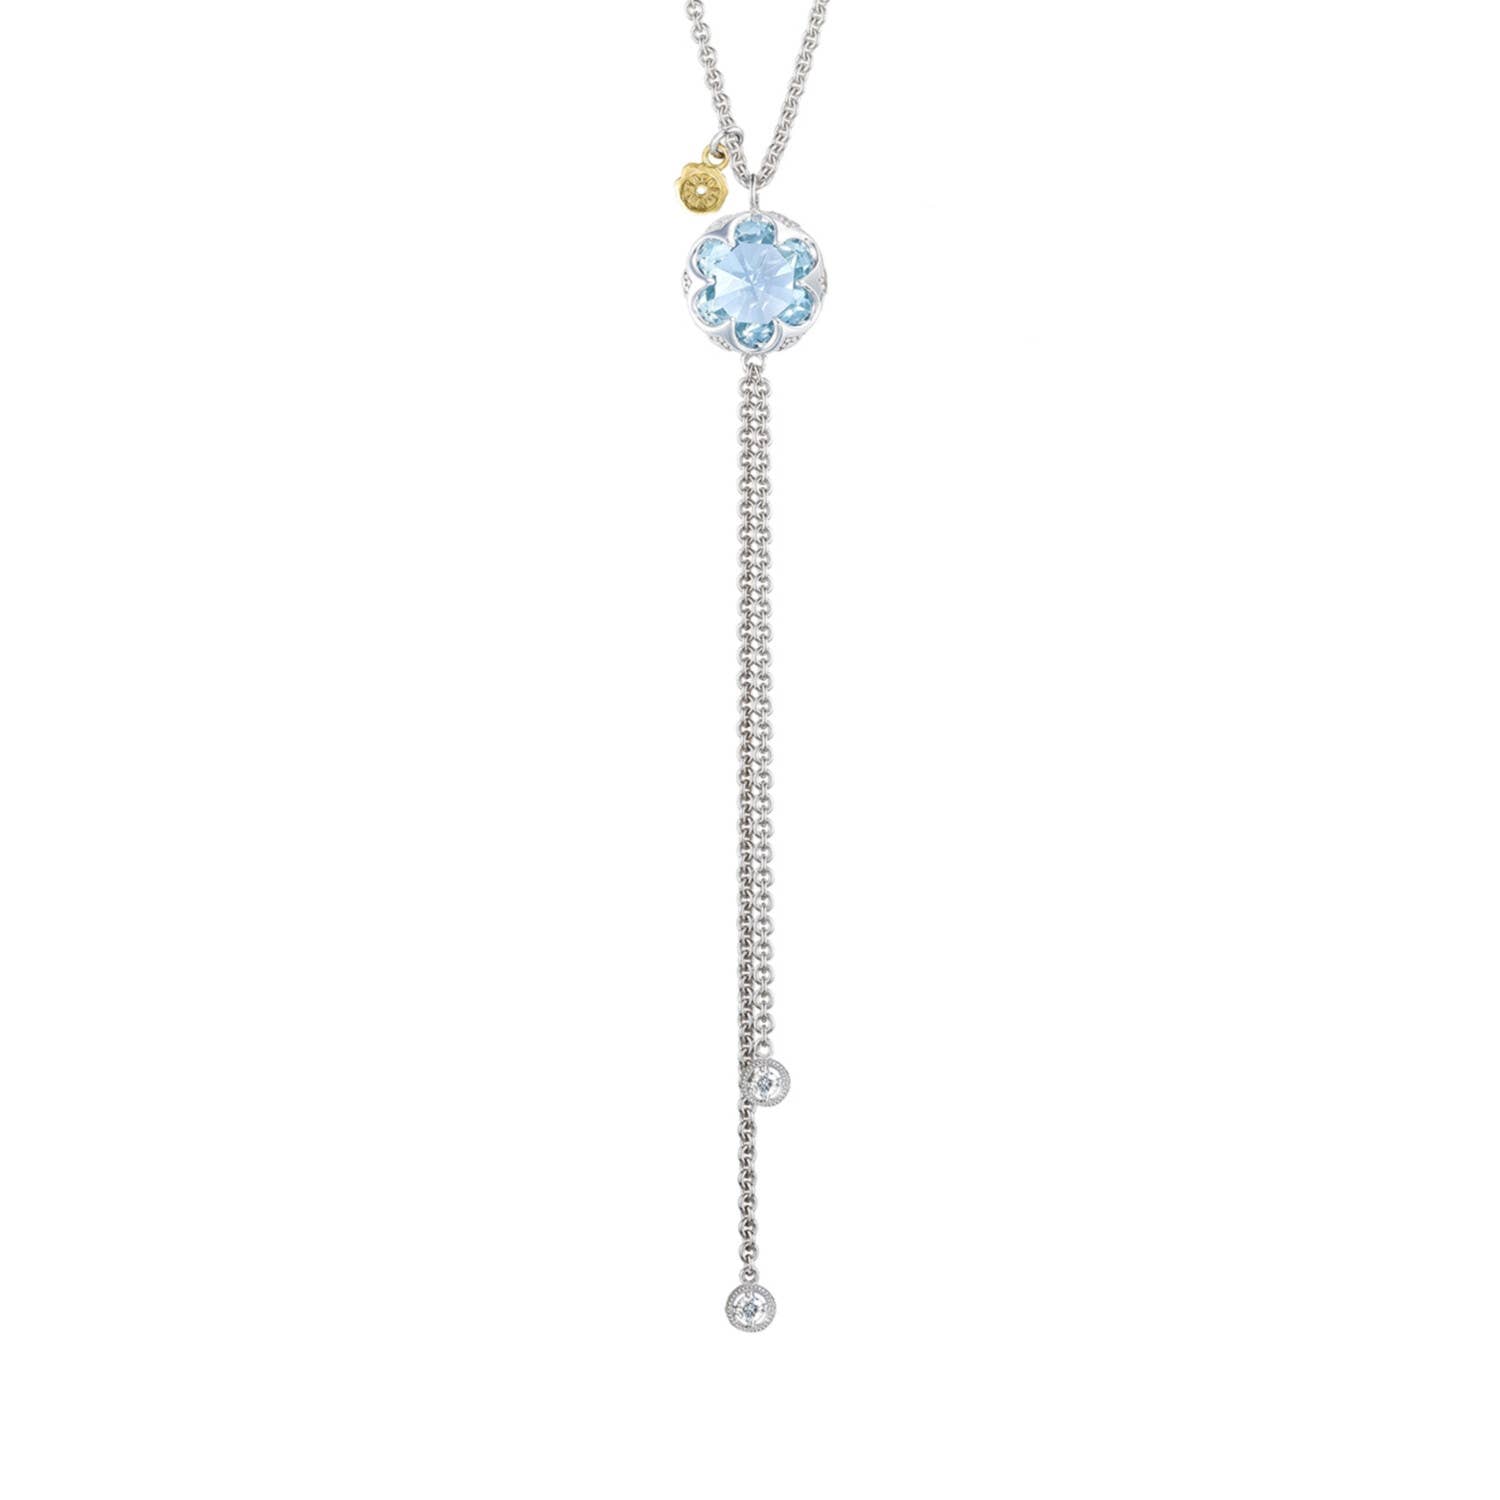 Lariat Necklace featuring Sky Blue Topaz